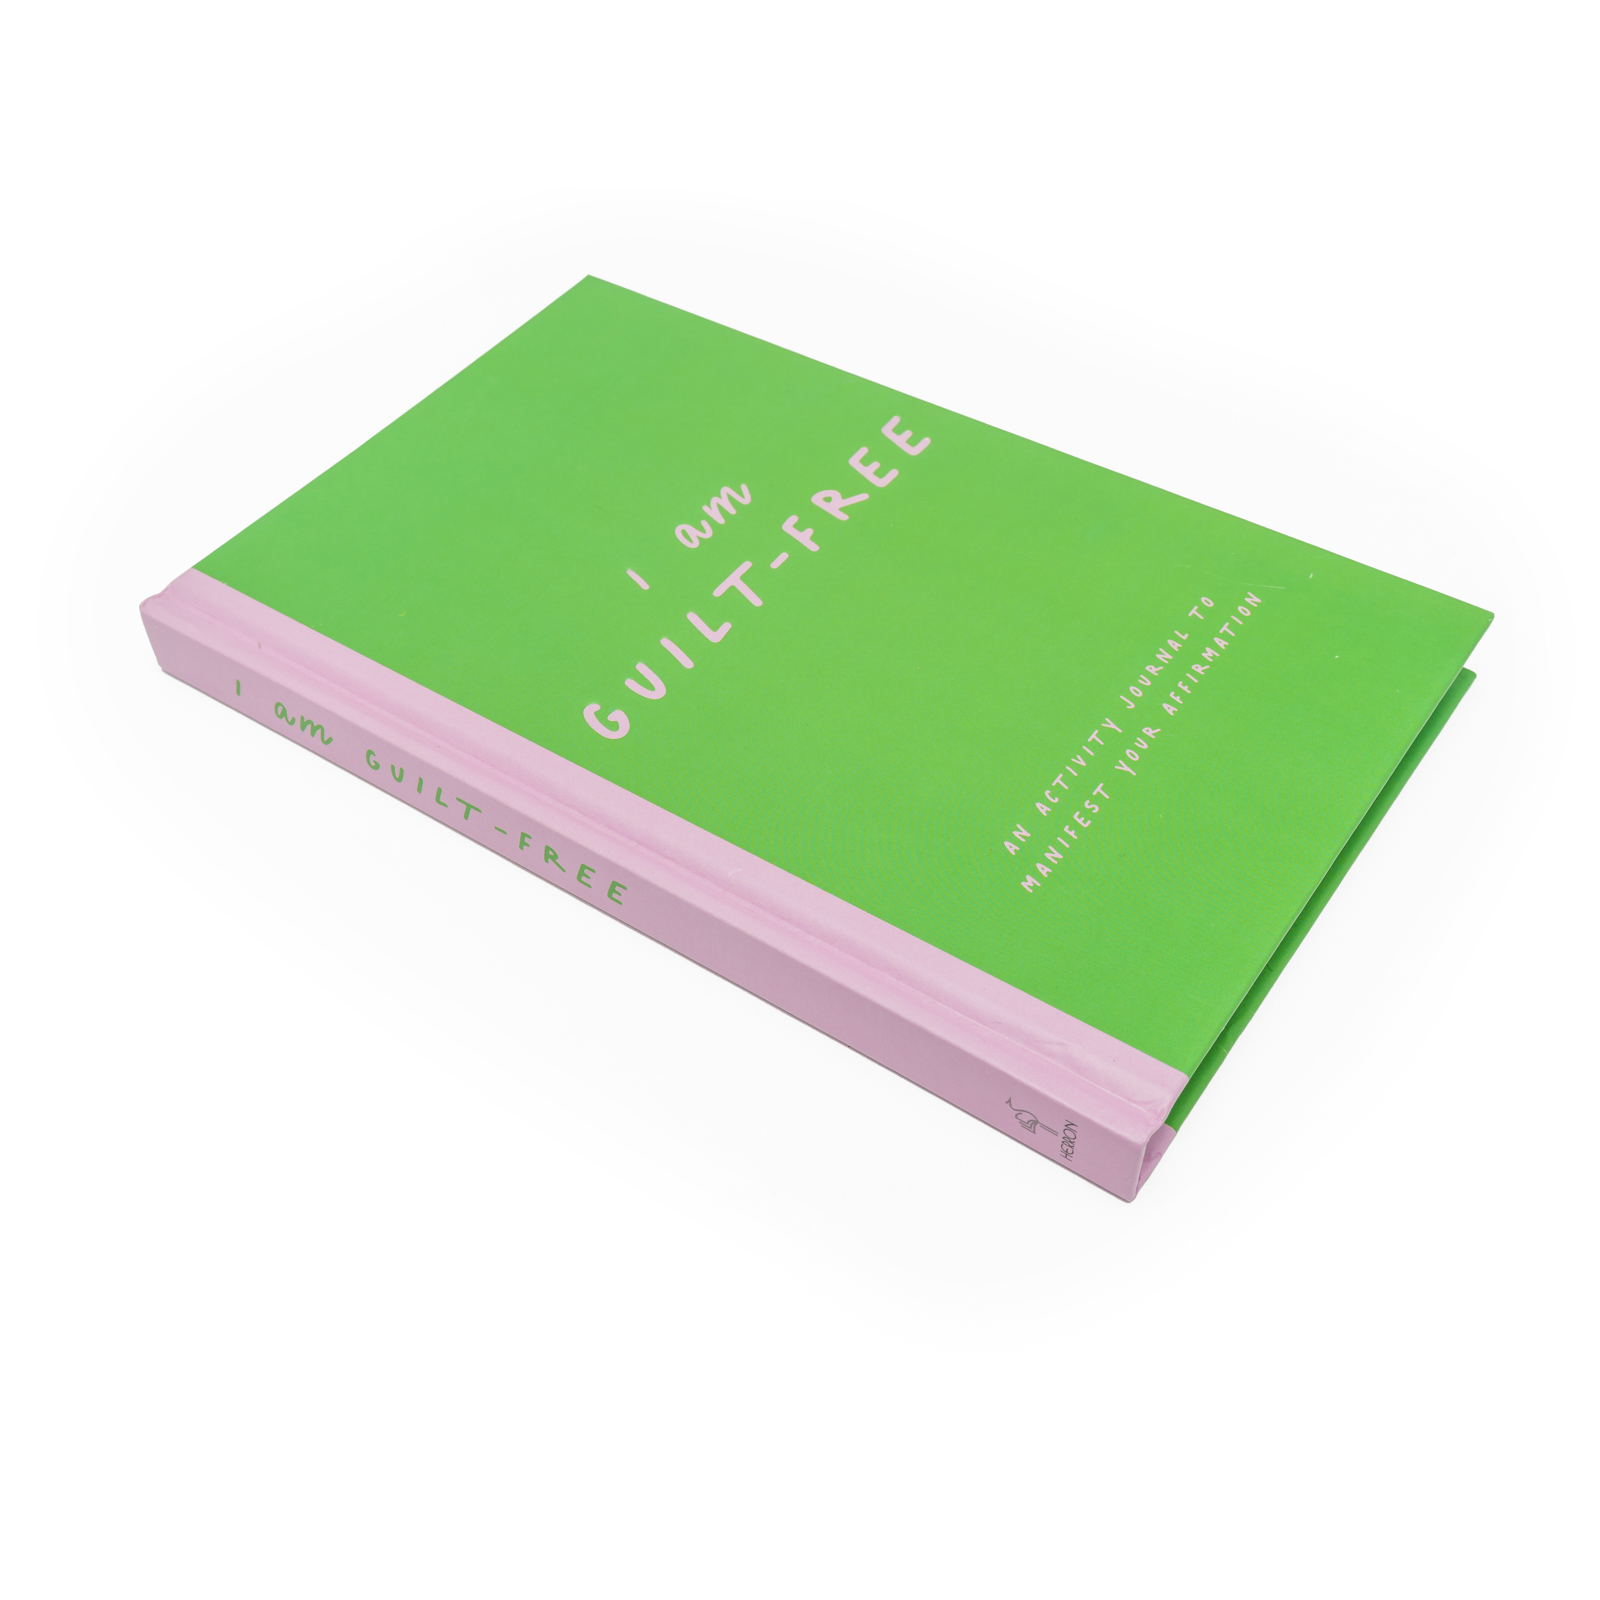 An Activity Journal To Manifest Your Affirmation by Herron Books - I Am Strong